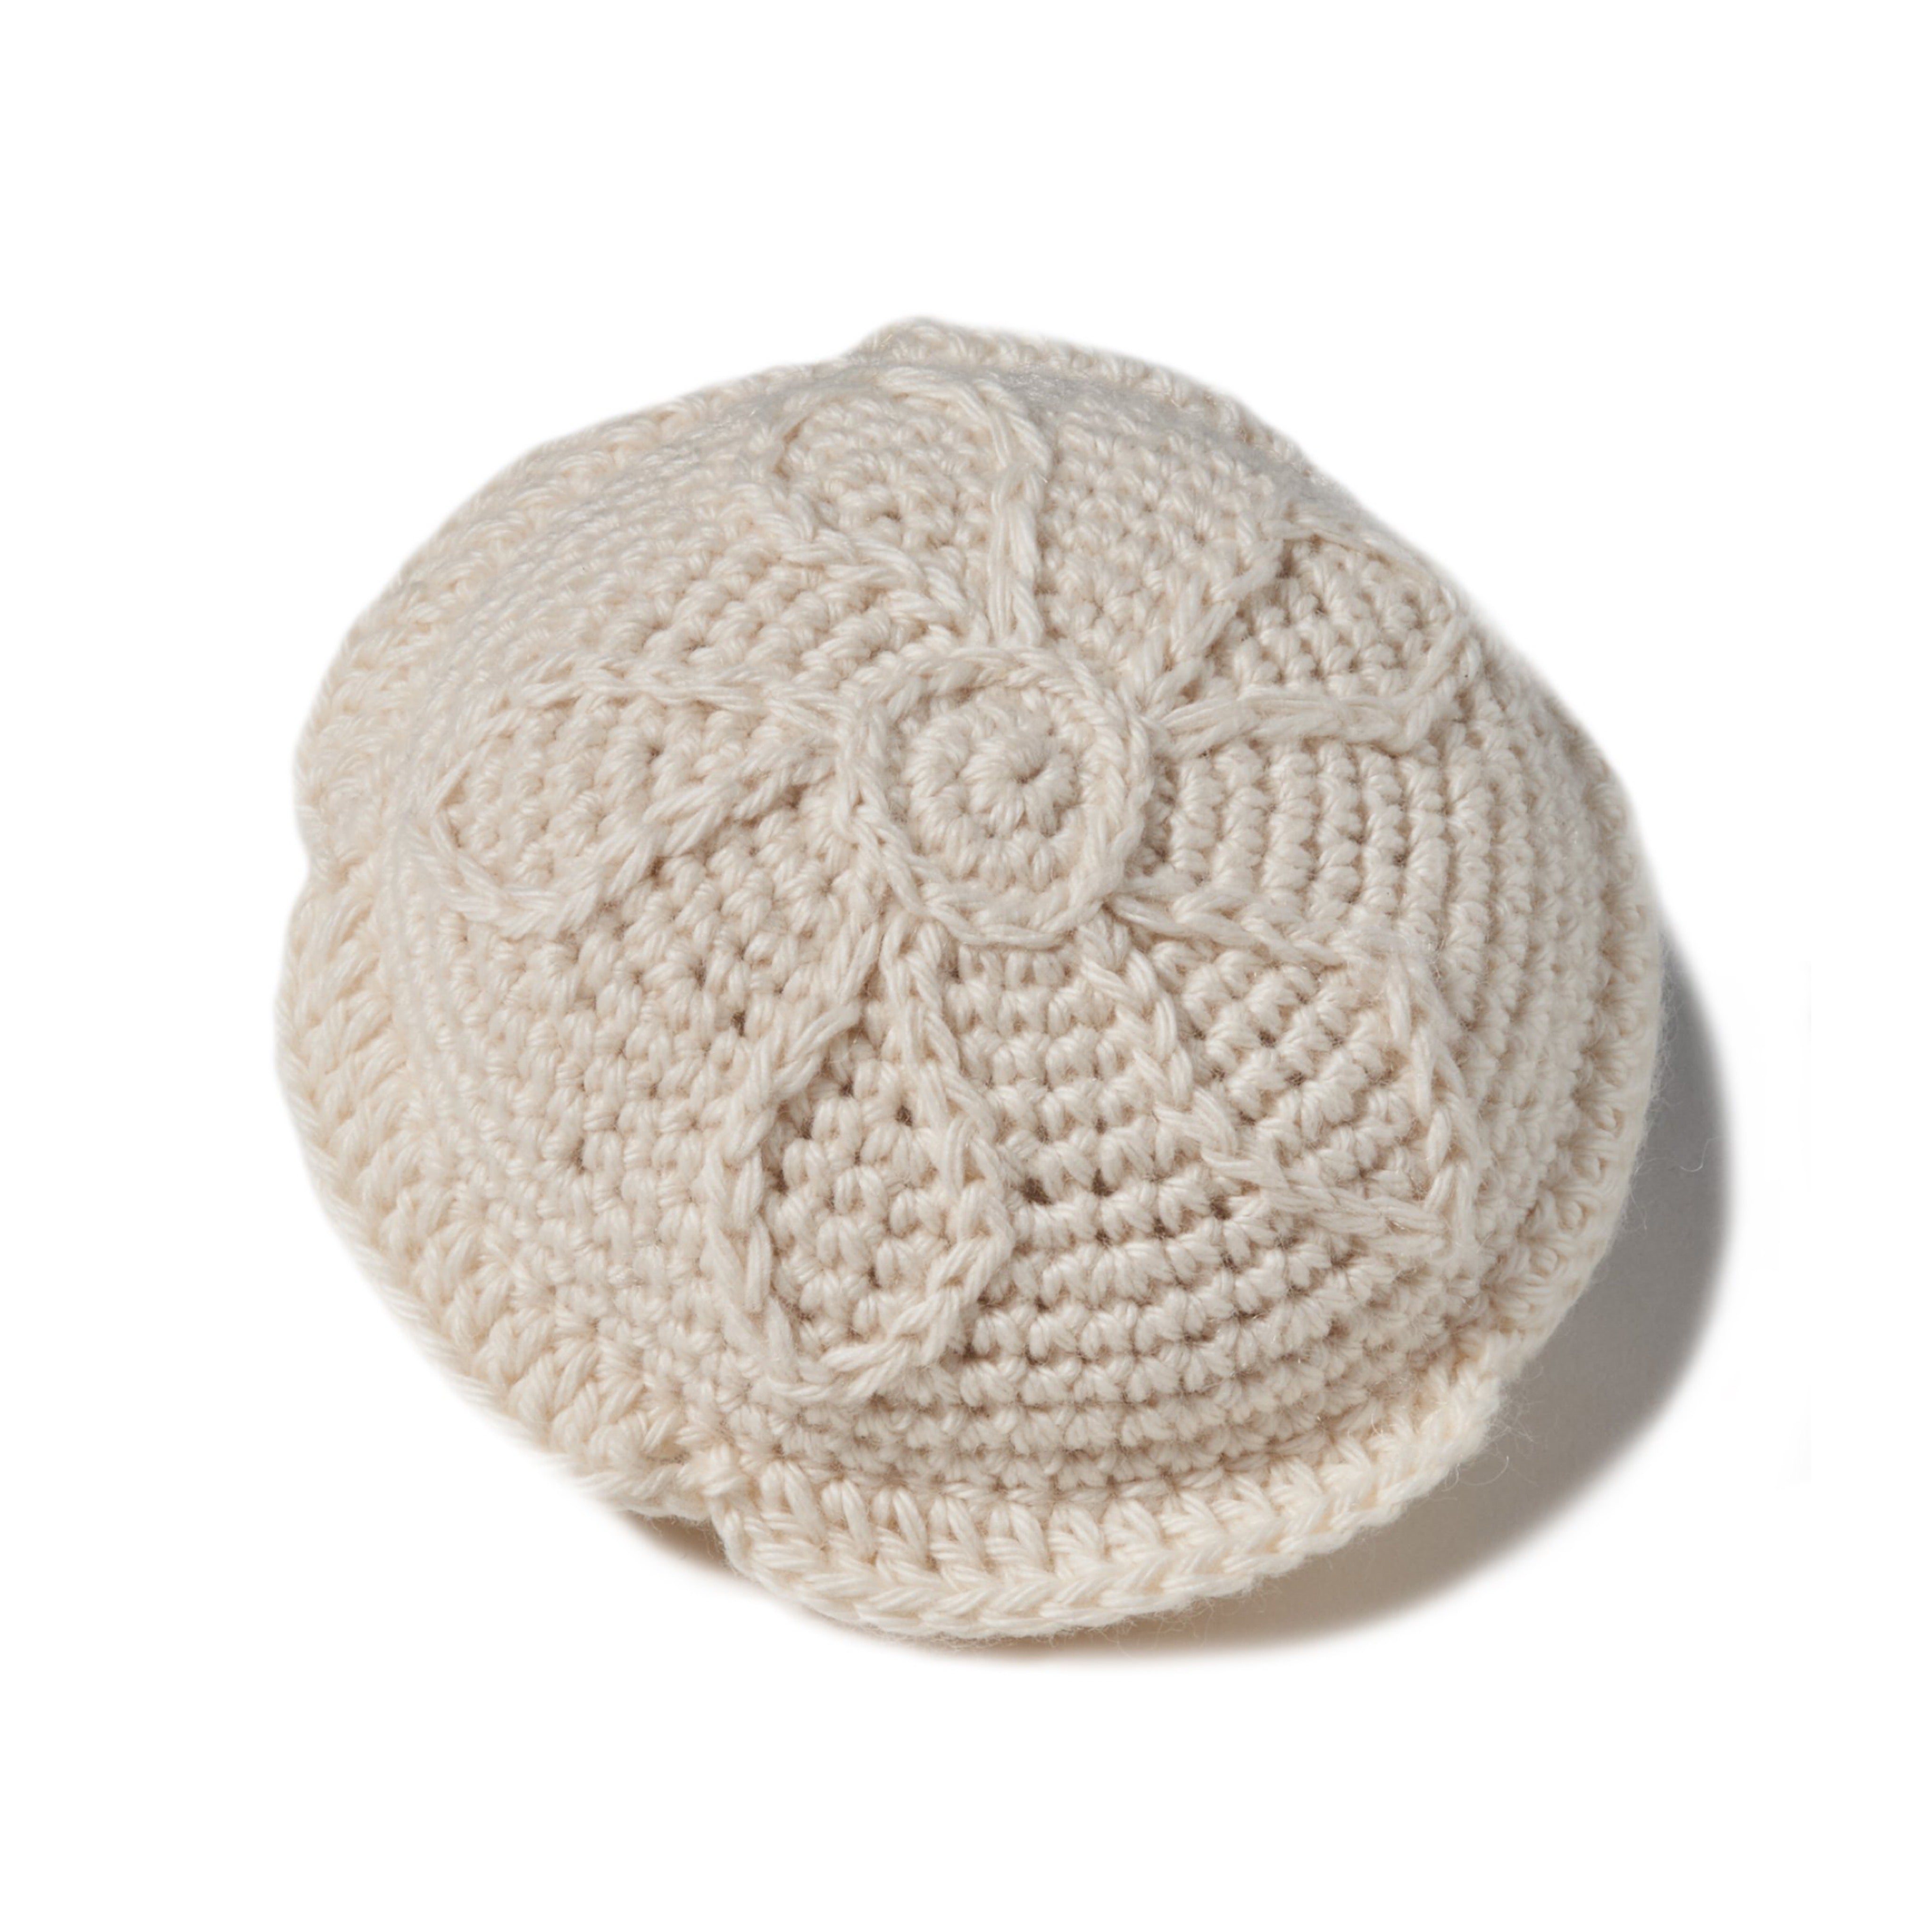 natural organic soft toy in the shape of a sand dollar with a rattle inside and at 4" in diameter..  100% organic cotton hand crochet knit.